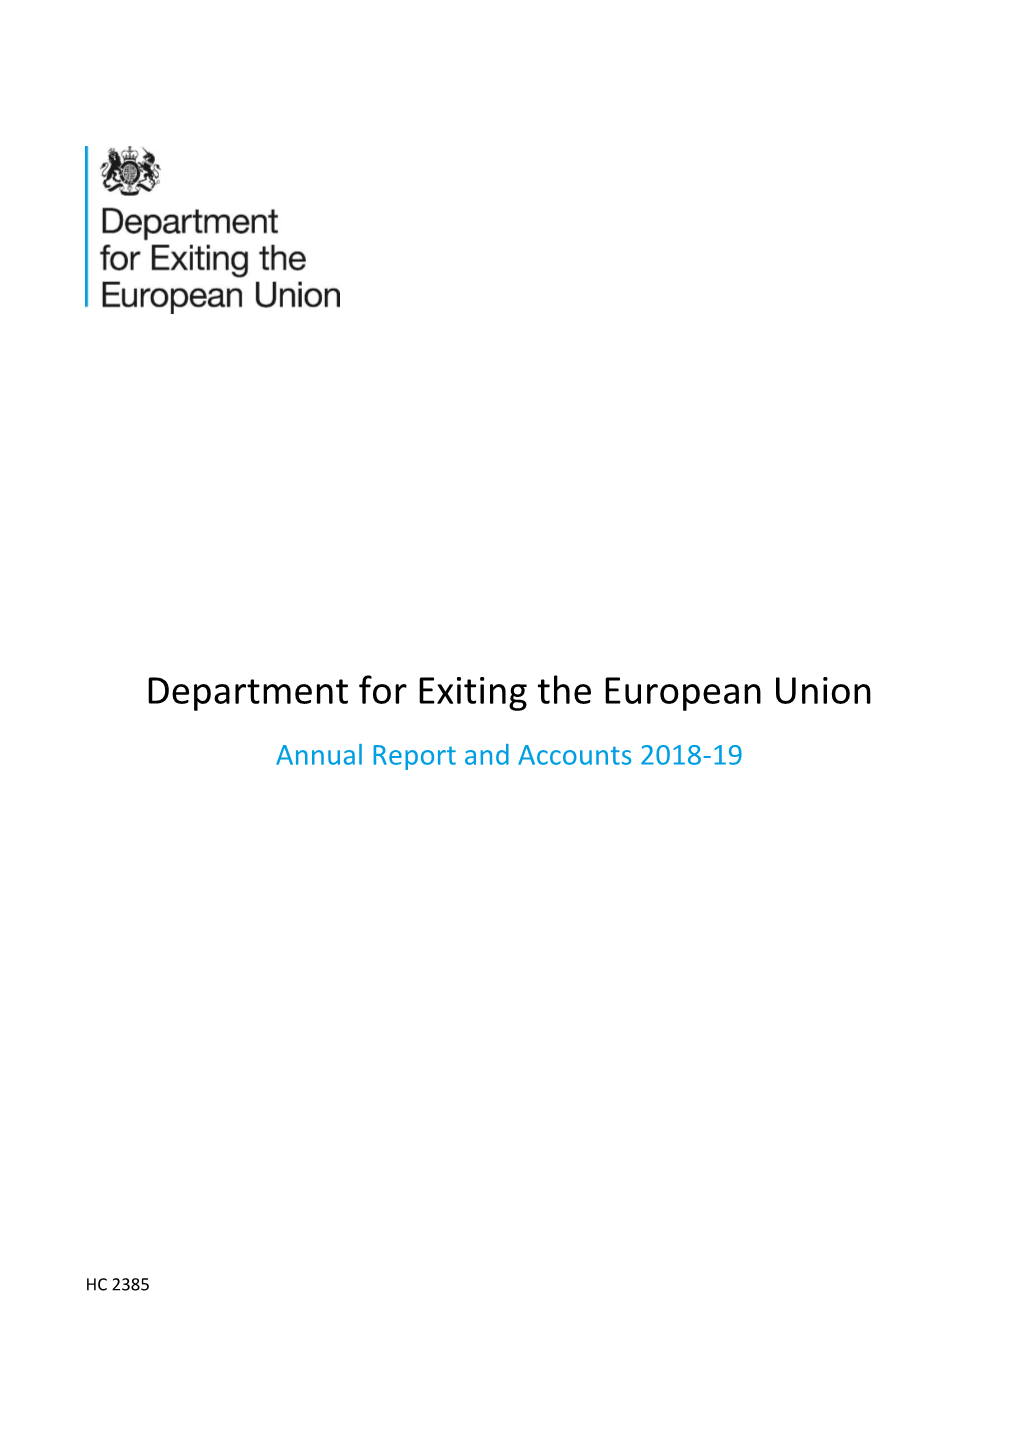 Department for Exiting the European Union Annual Report and Accounts 2018-19